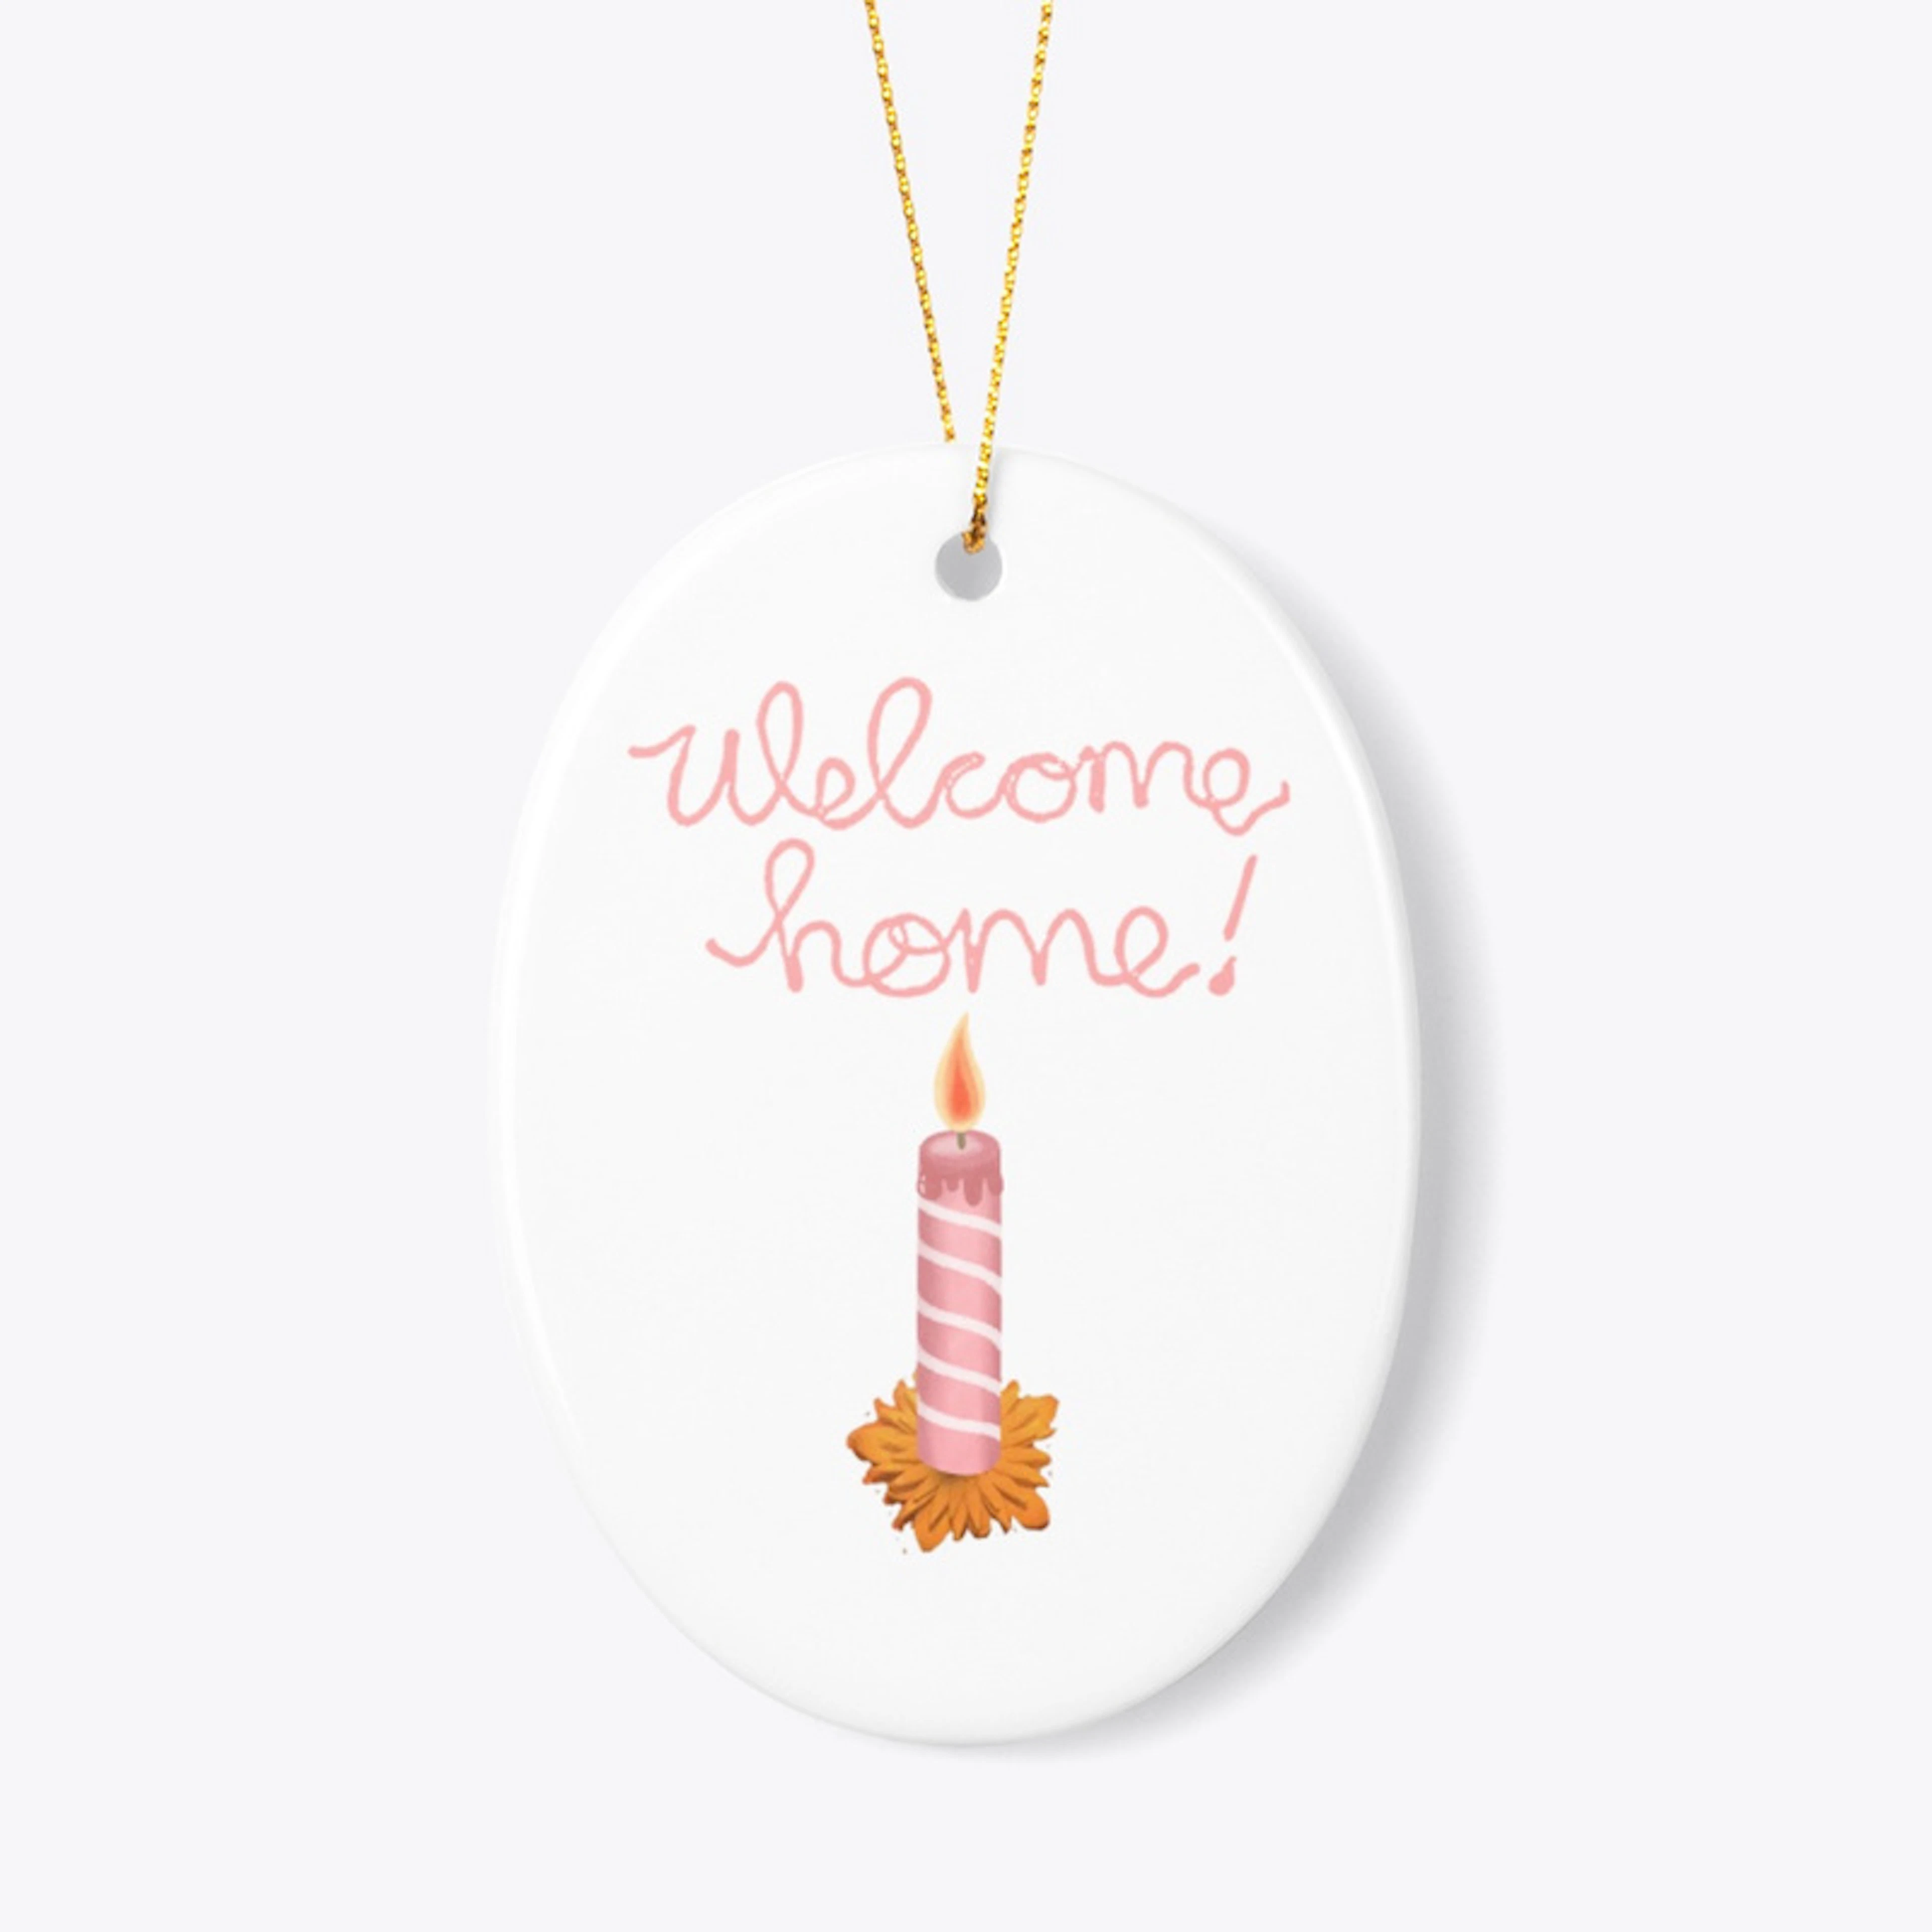 "Welcome Home"